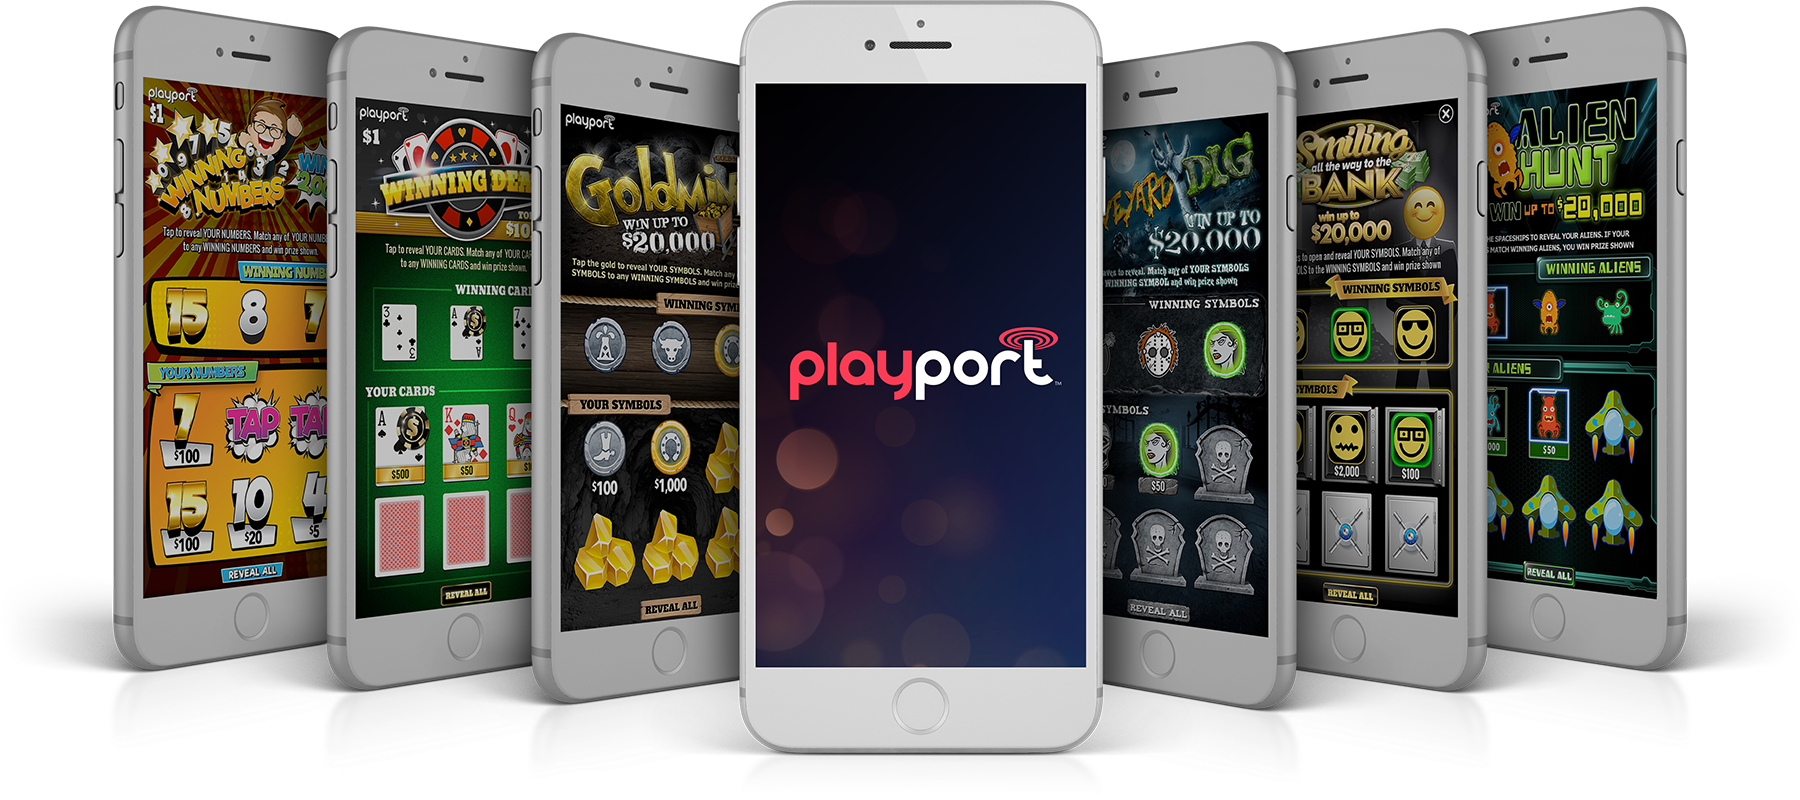 Playport Gaming Systems